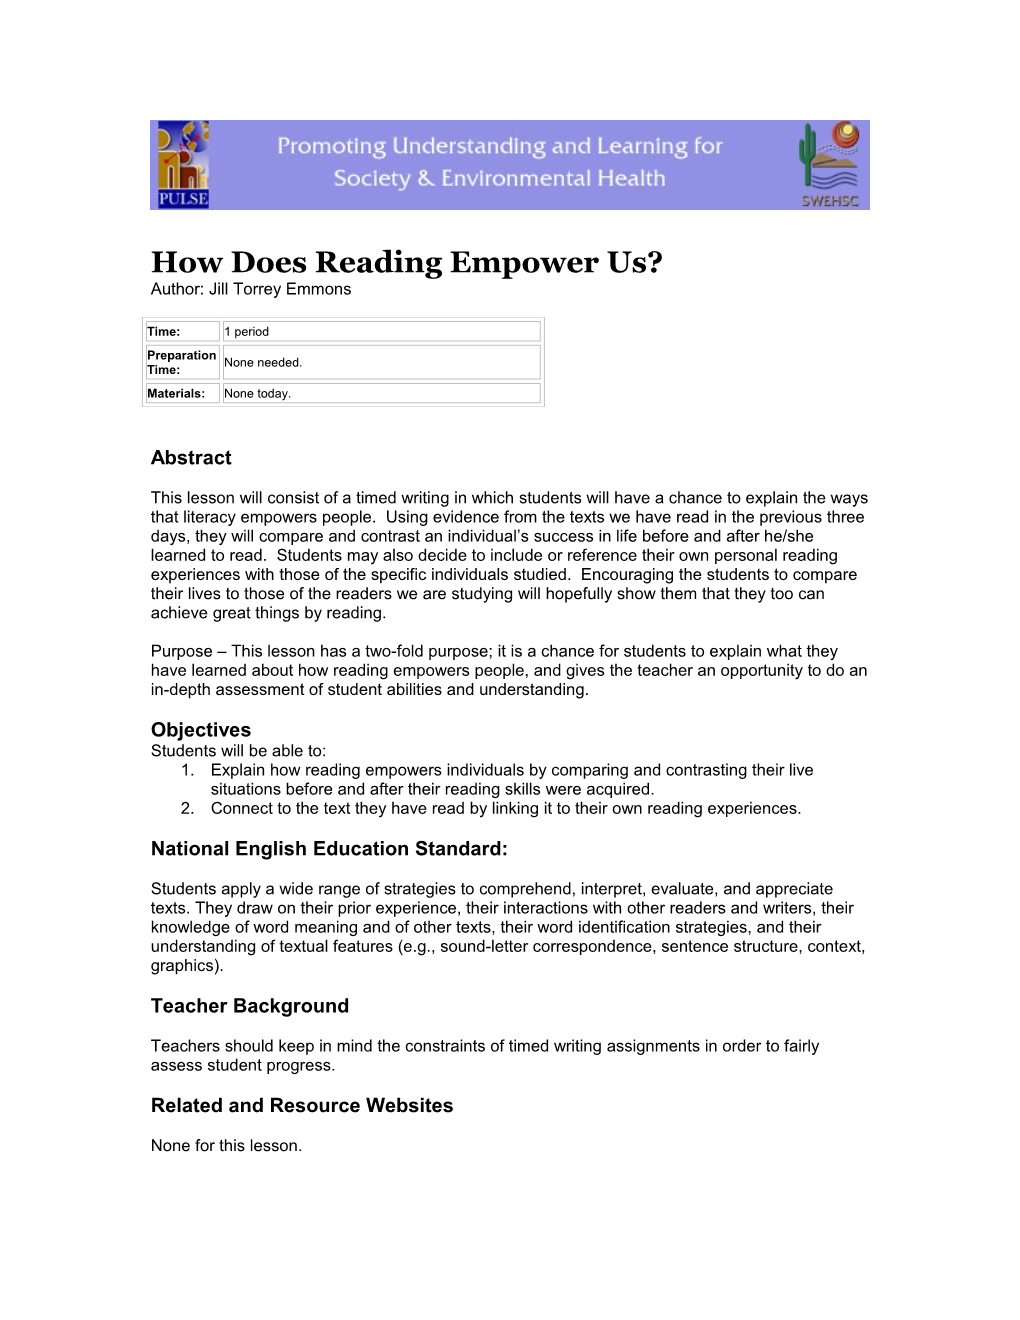 How Does Reading Empower Us?